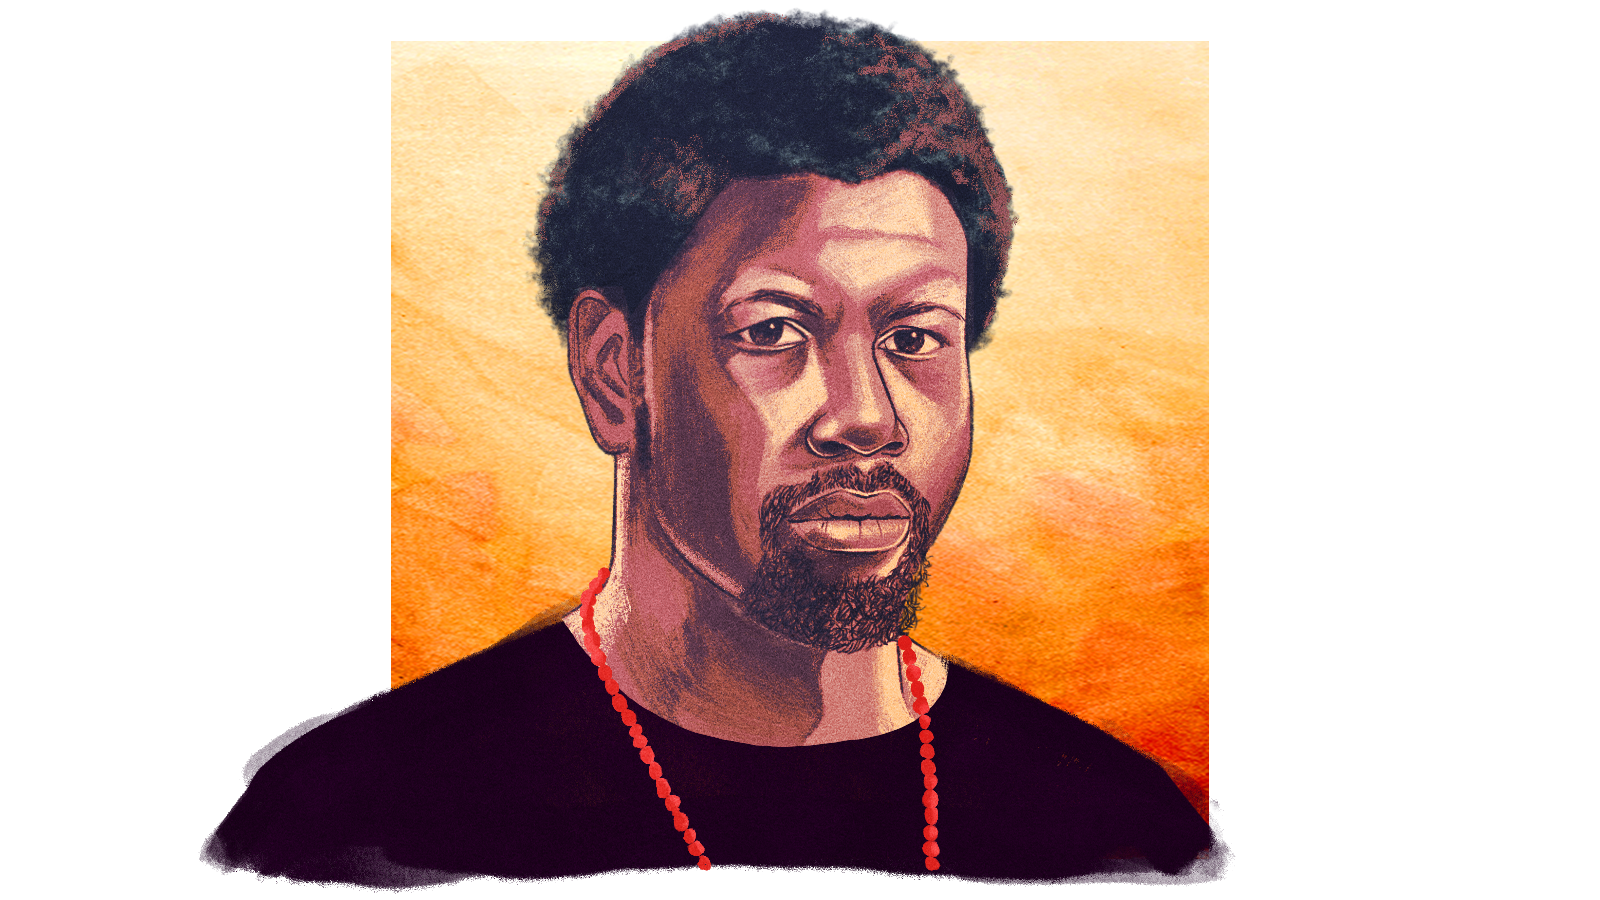 Illustrated portrait of a Black man in his thirties with a small afro, goatee, red beaded necklace and black shirt; a square of orange watercolor brushstrokes is behind him